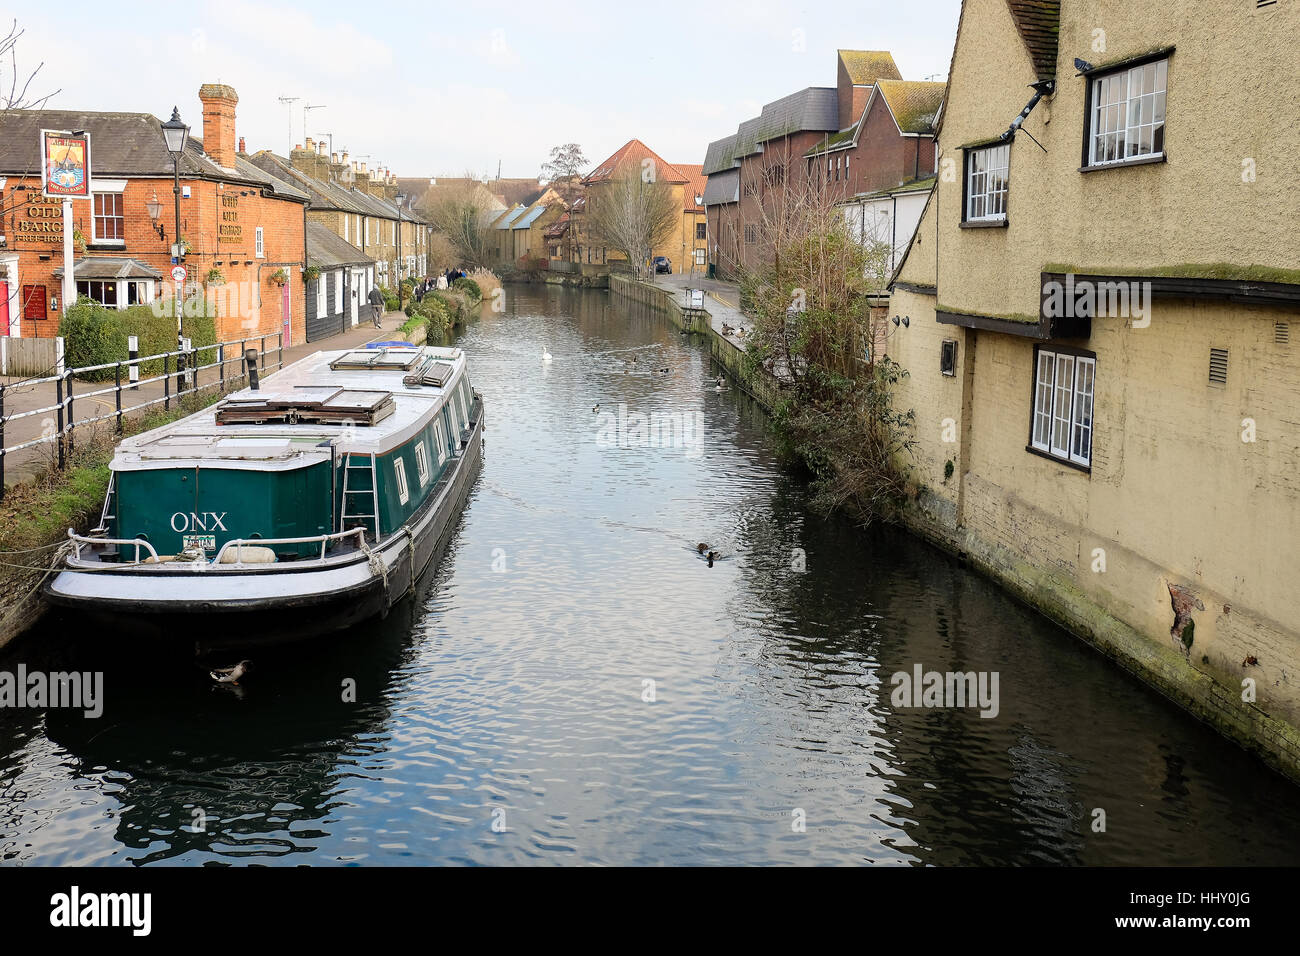 A barge moored on a canal by a country pub in Hertford, England Stock Photo